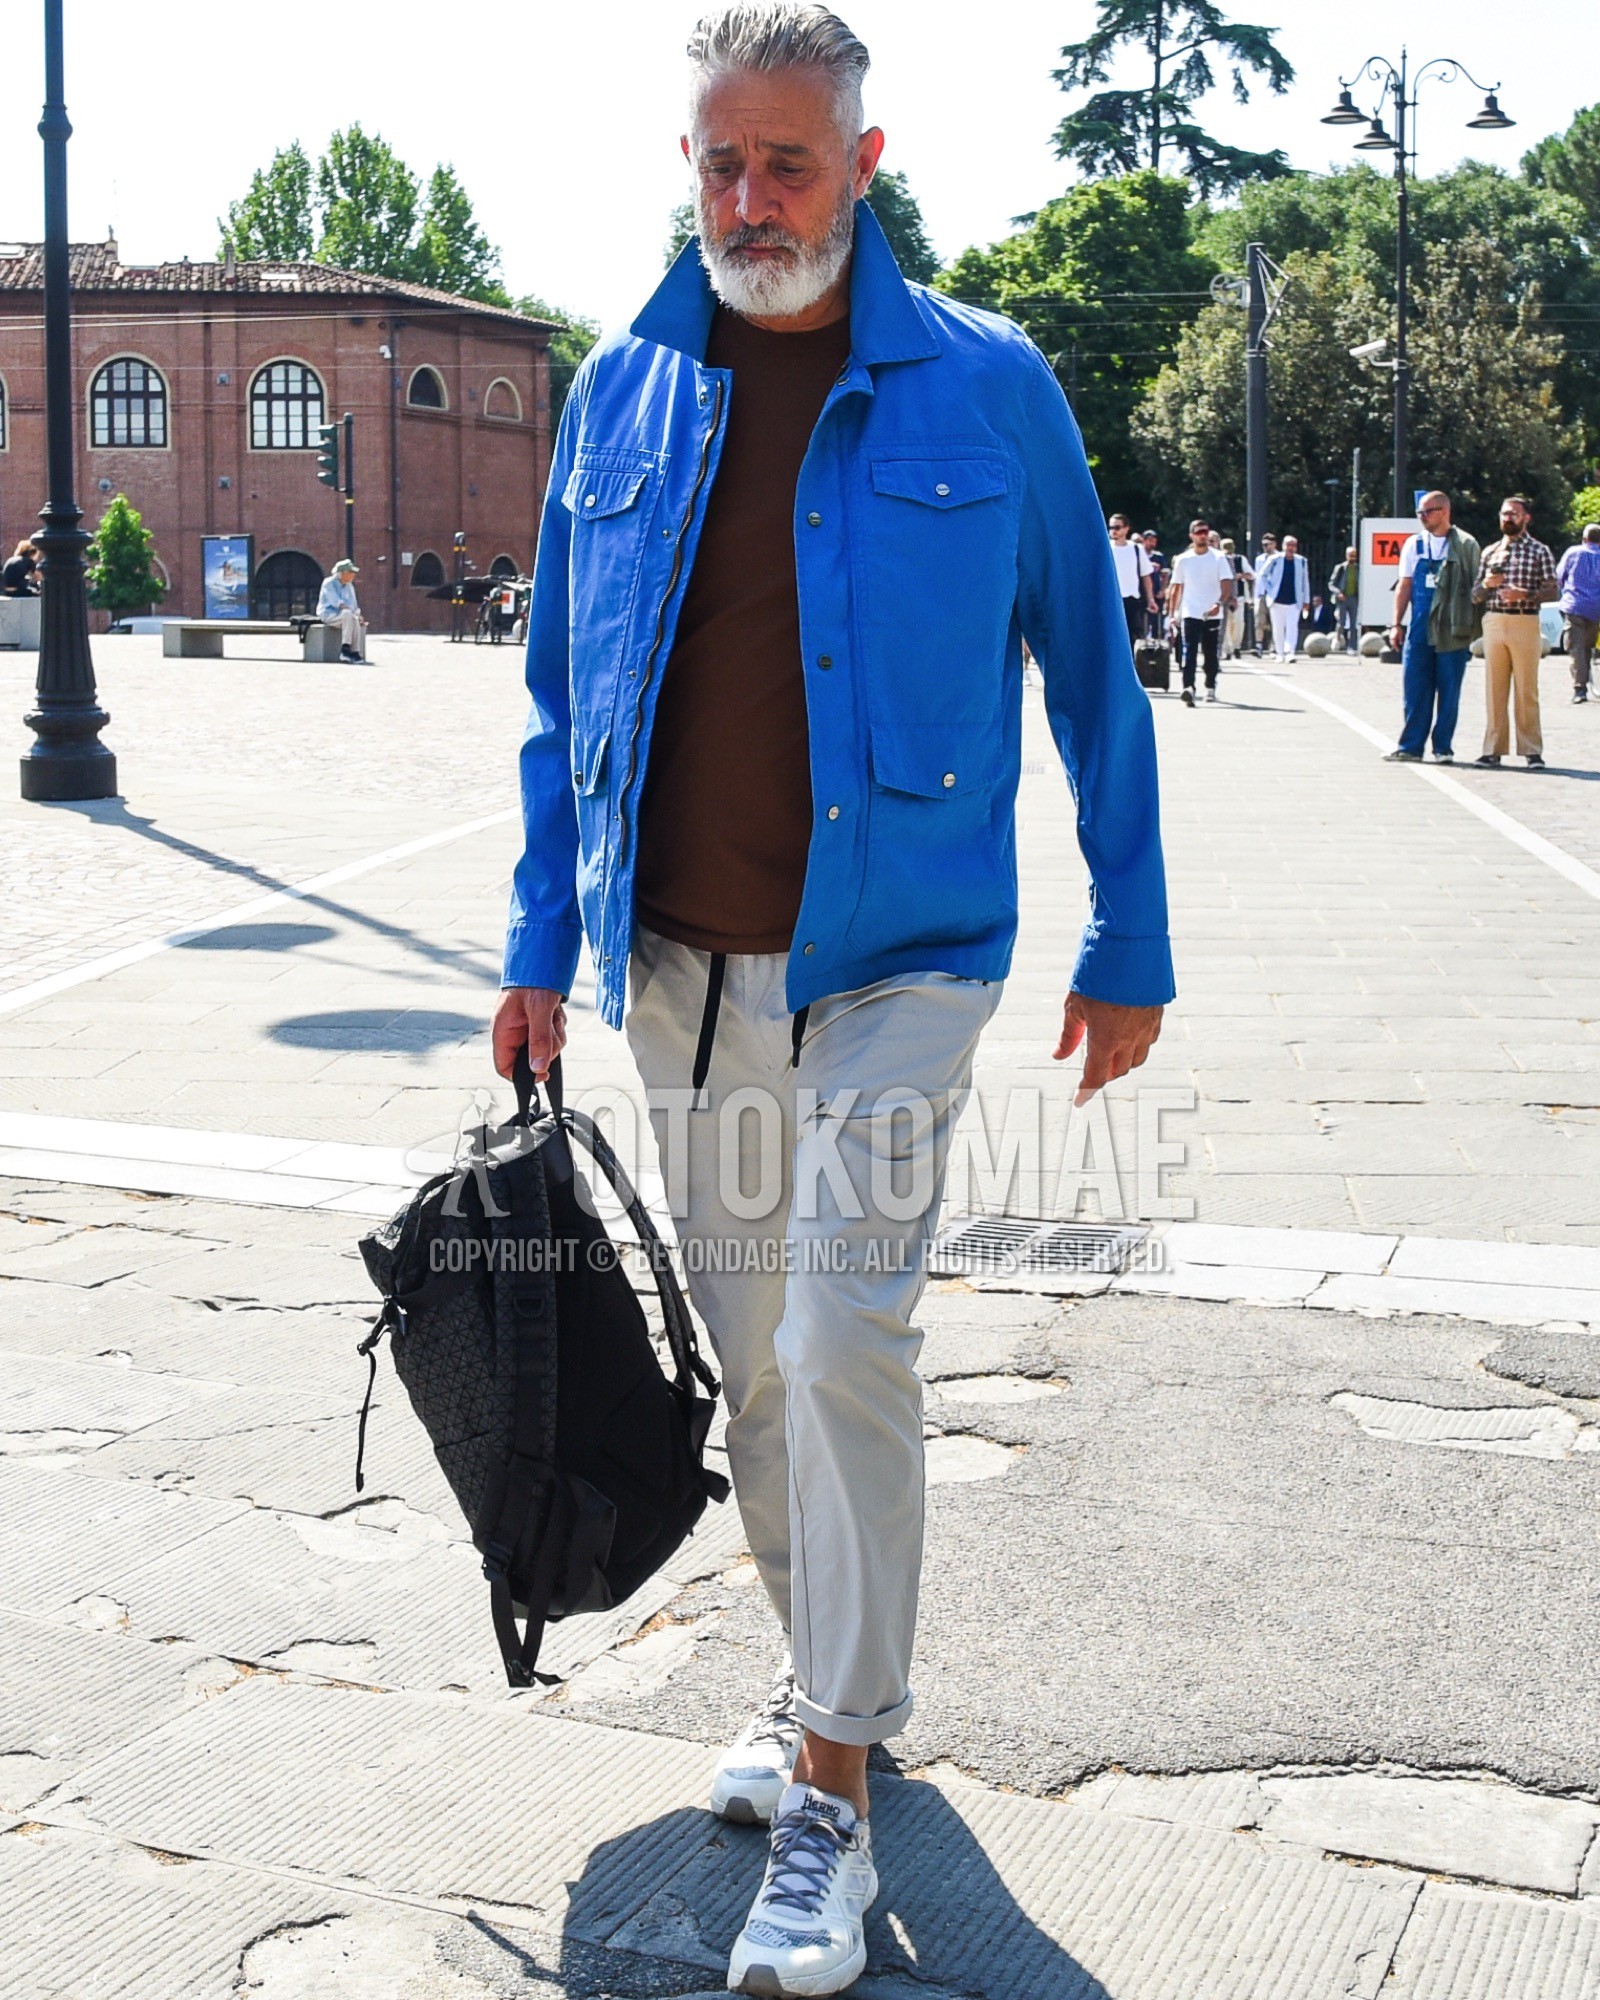 Men's spring summer outfit with blue plain field jacket/hunting jacket, brown plain t-shirt, gray plain cotton pants, white low-cut sneakers, black plain backpack.